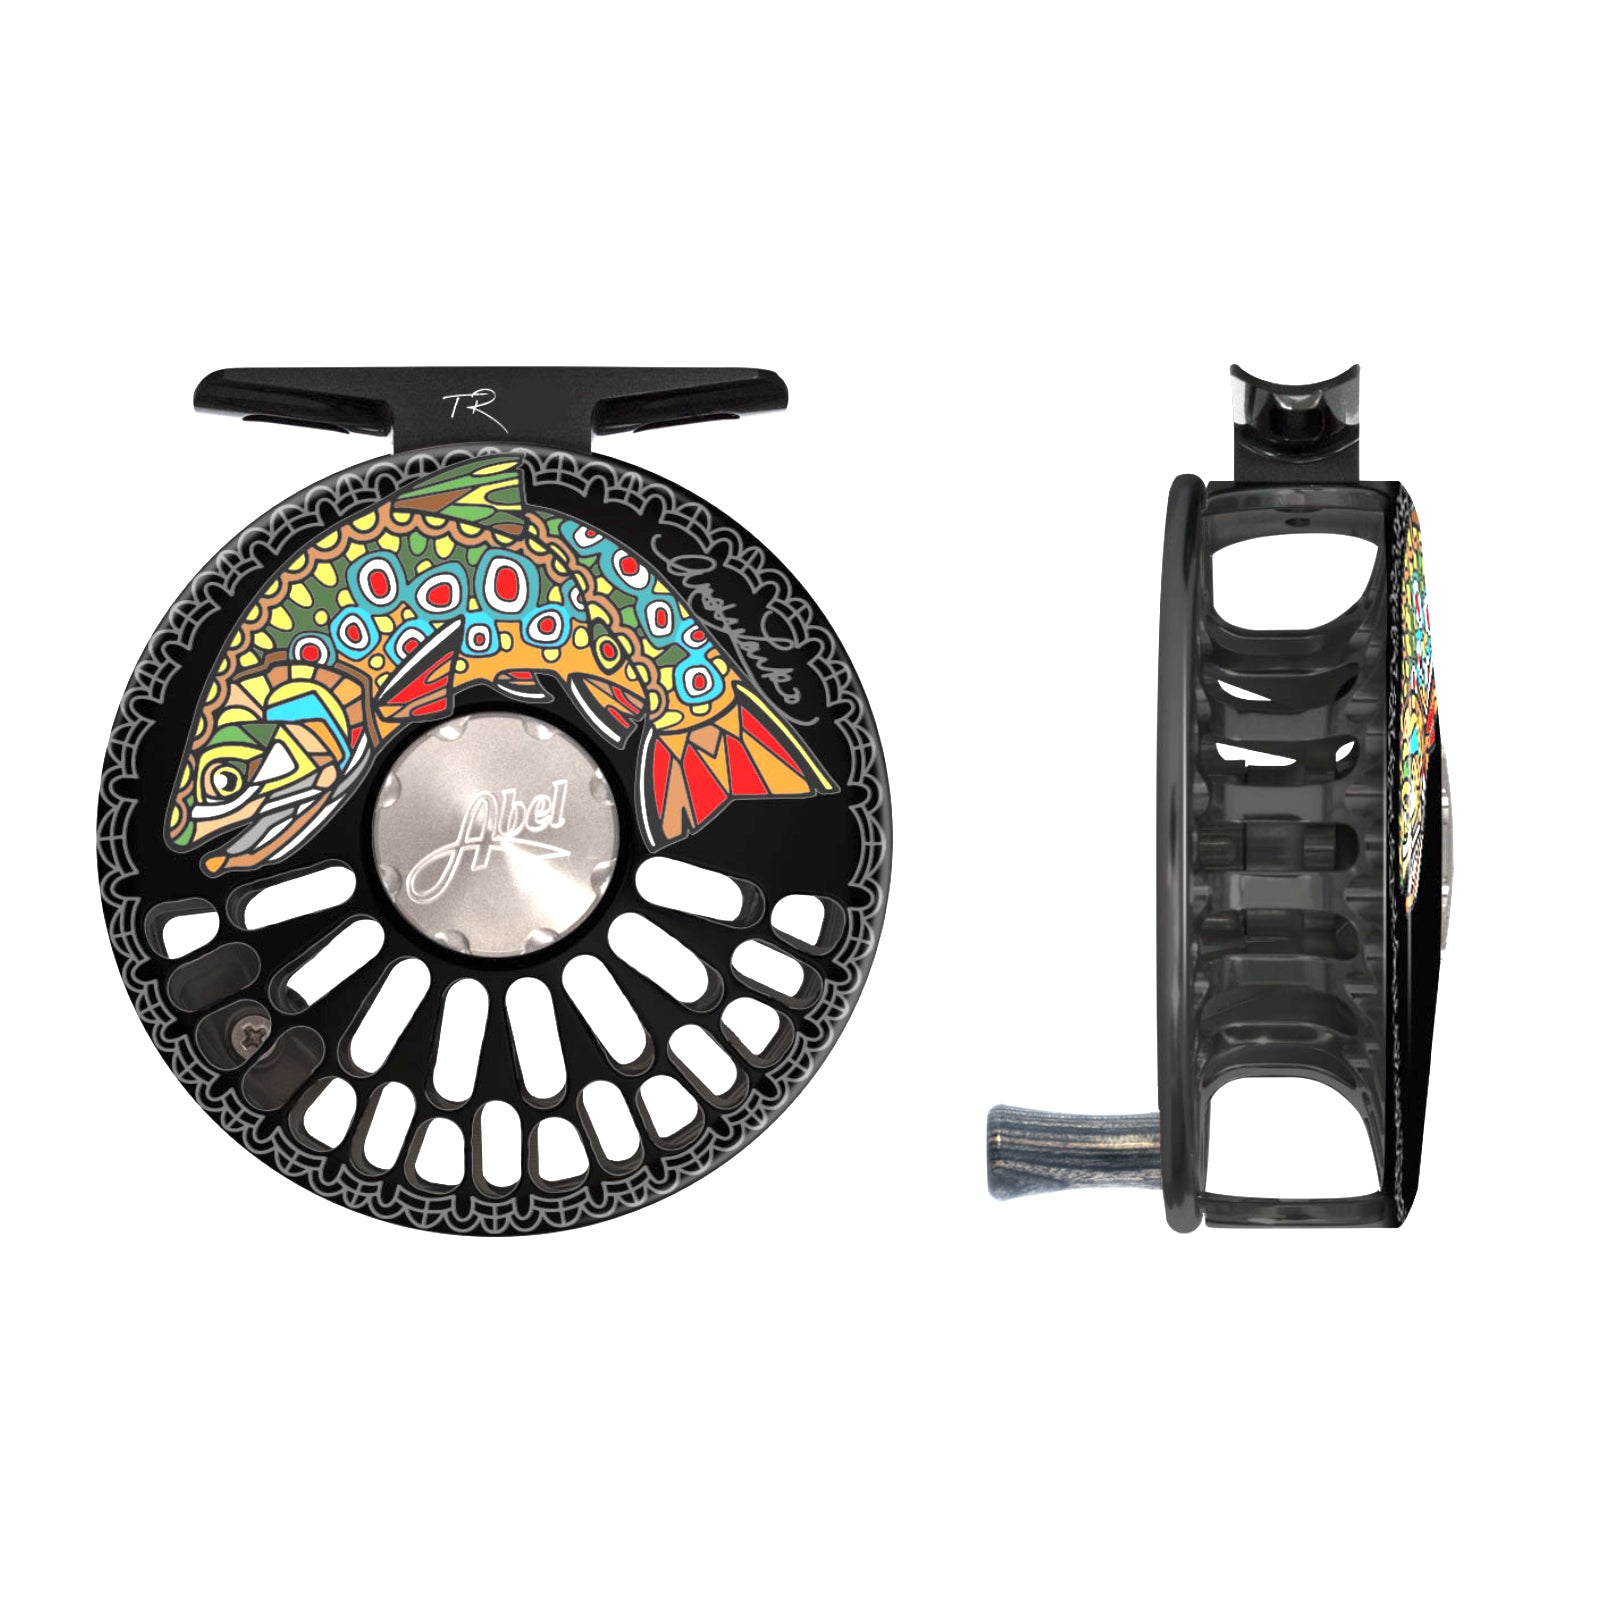 Abel Rove Fly Reel - Combination Graphic Plate ~ In Stock Ready to